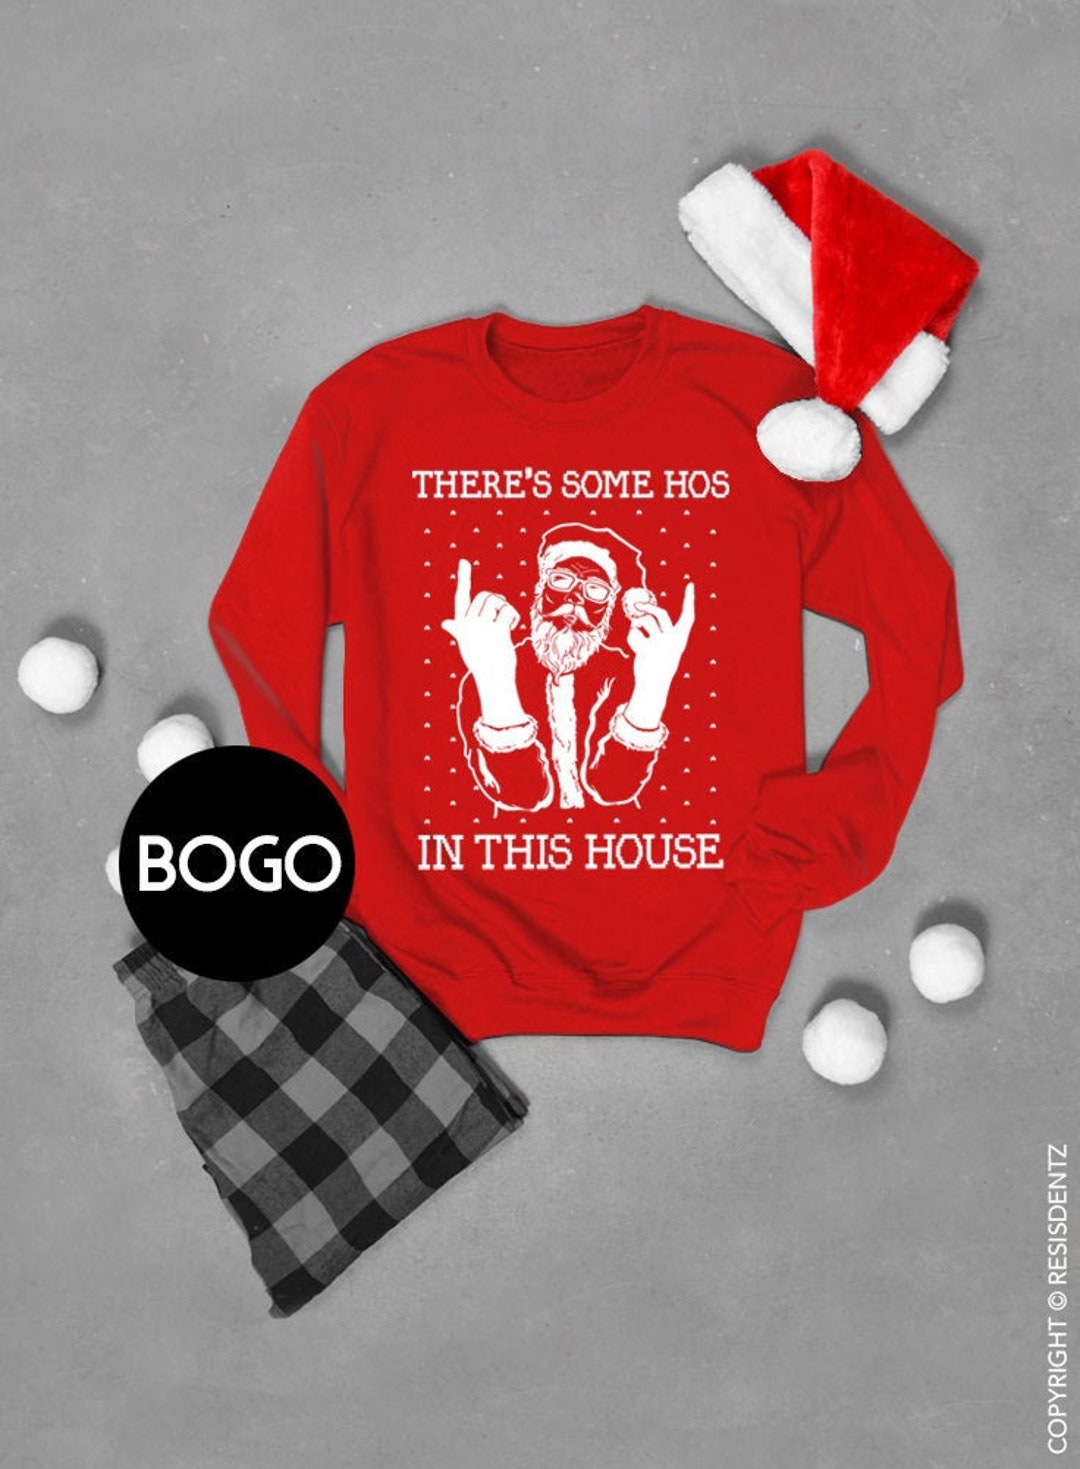 Pef dump Montgomery There's Some Hos in This House Sweatshirt Christmas - Etsy